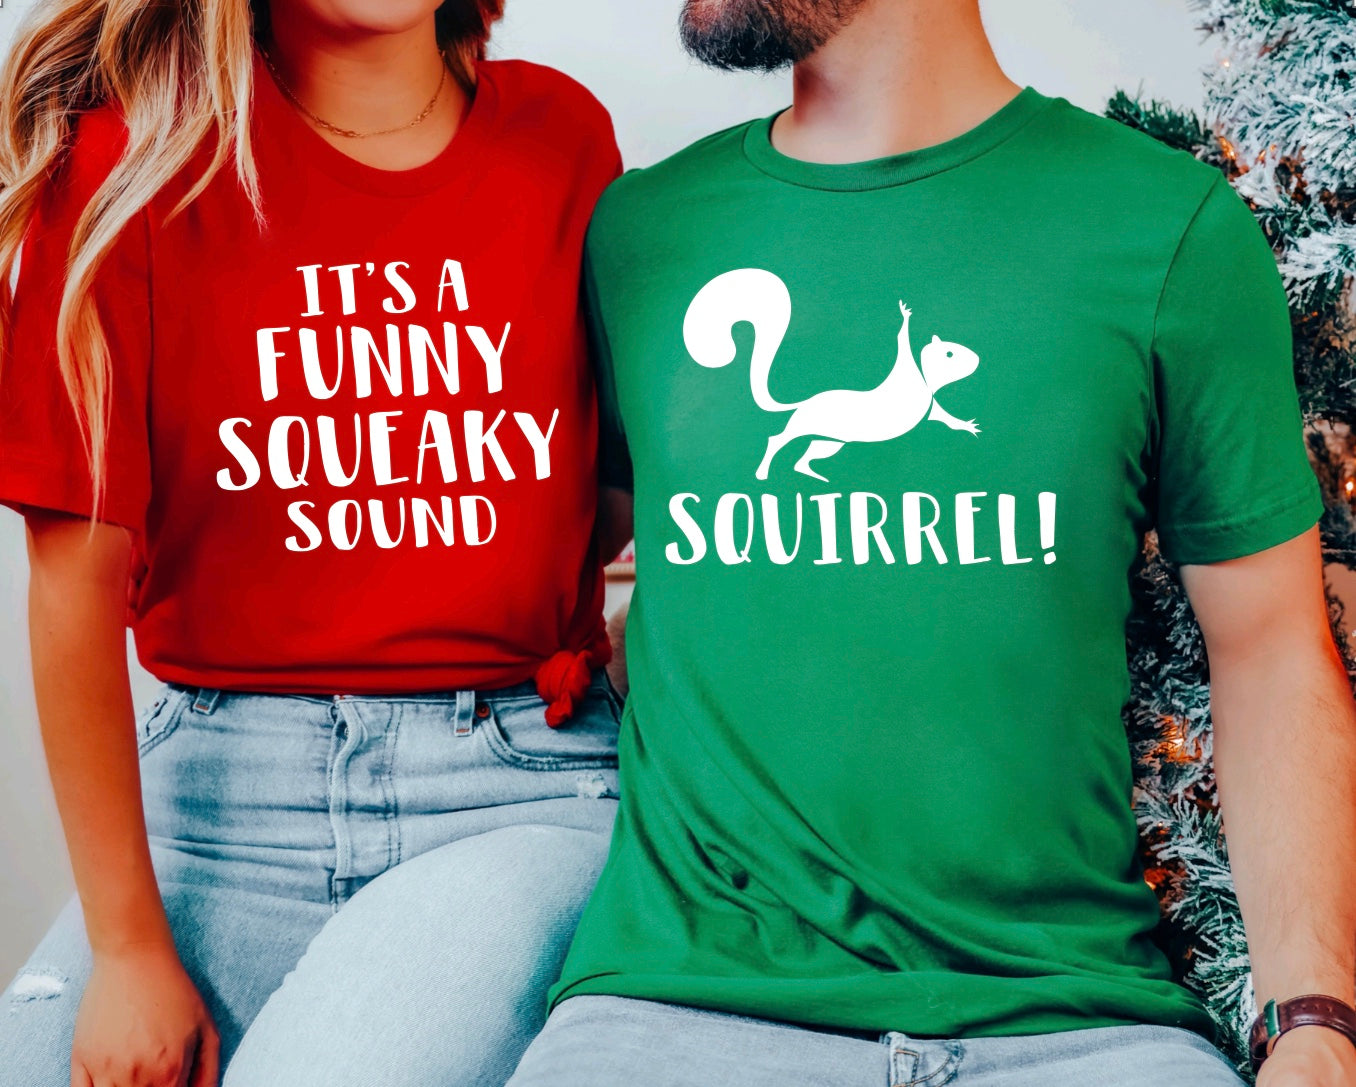 It’s a funny squeaky sound/squirrel t-shirts 